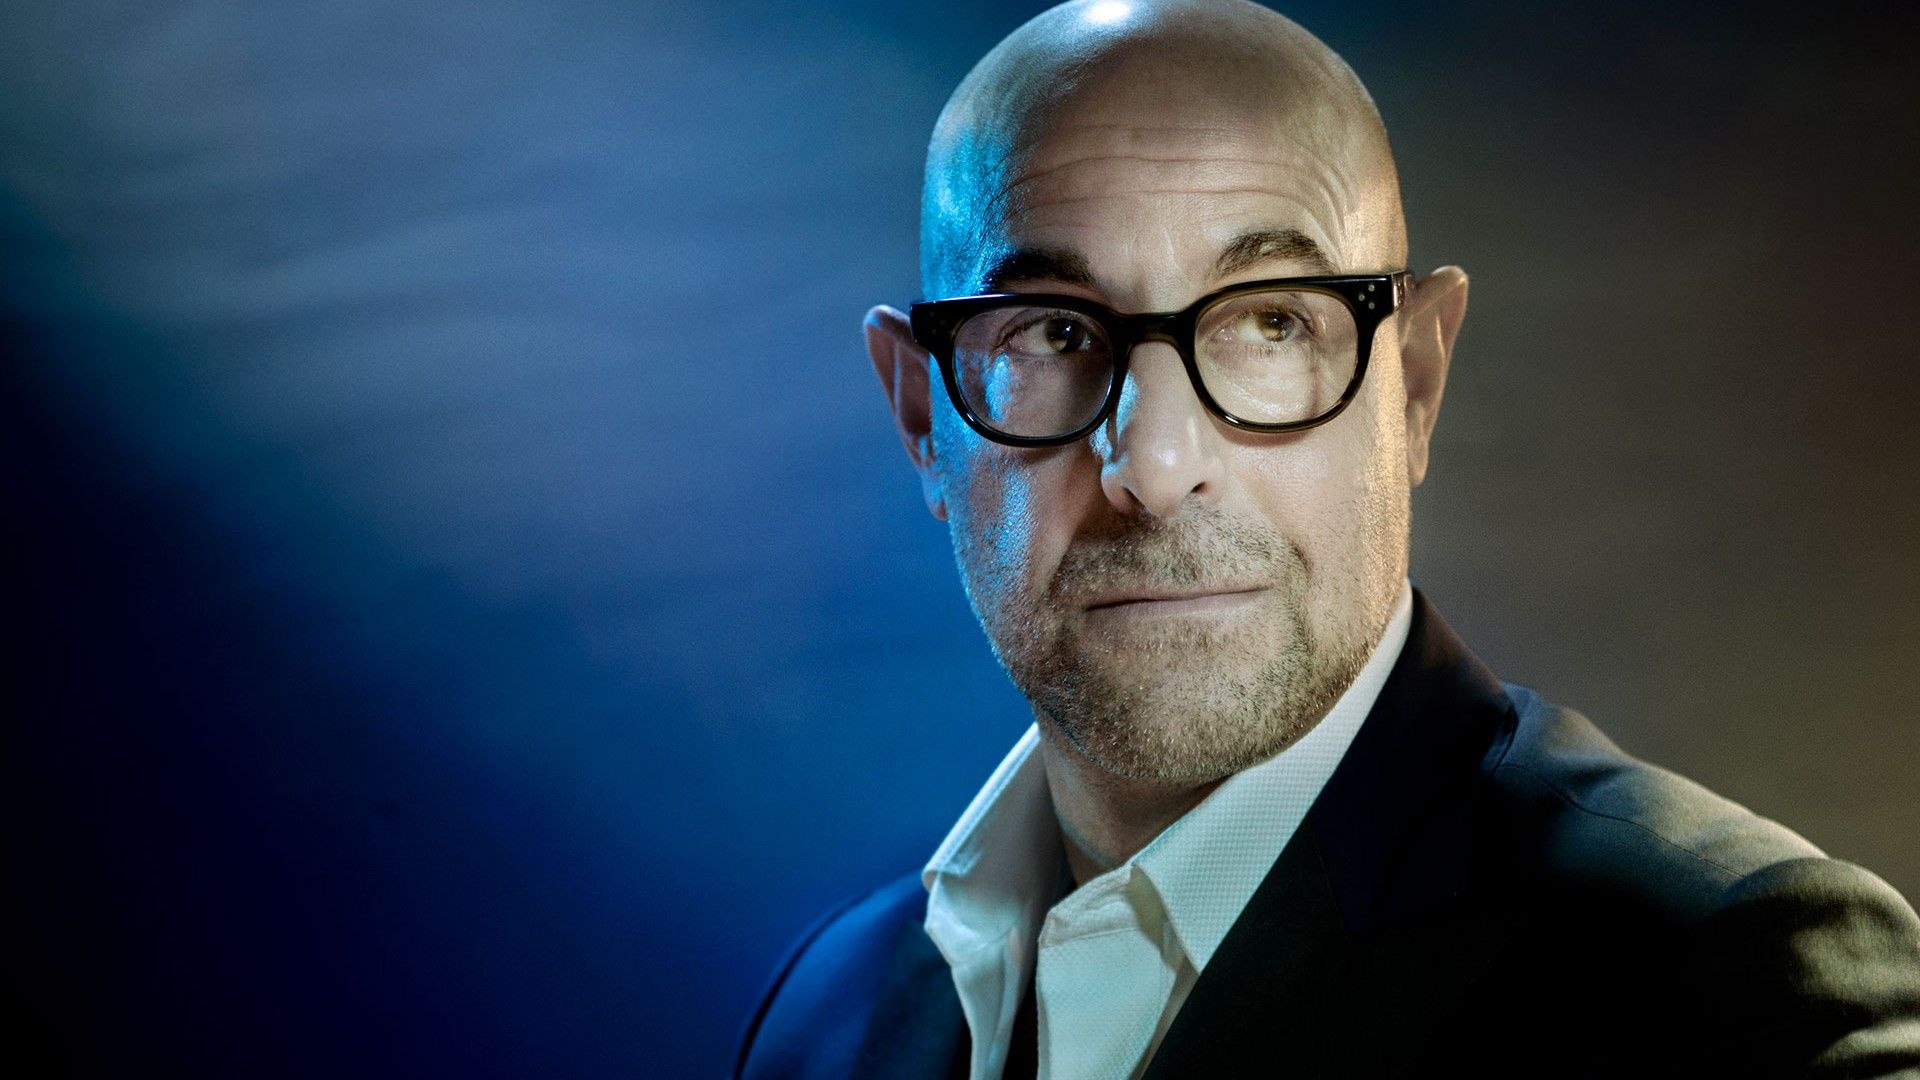 Stanley Tucci, Talented, Square Mile, The Lovely Bones, 1920x1080 Full HD Desktop